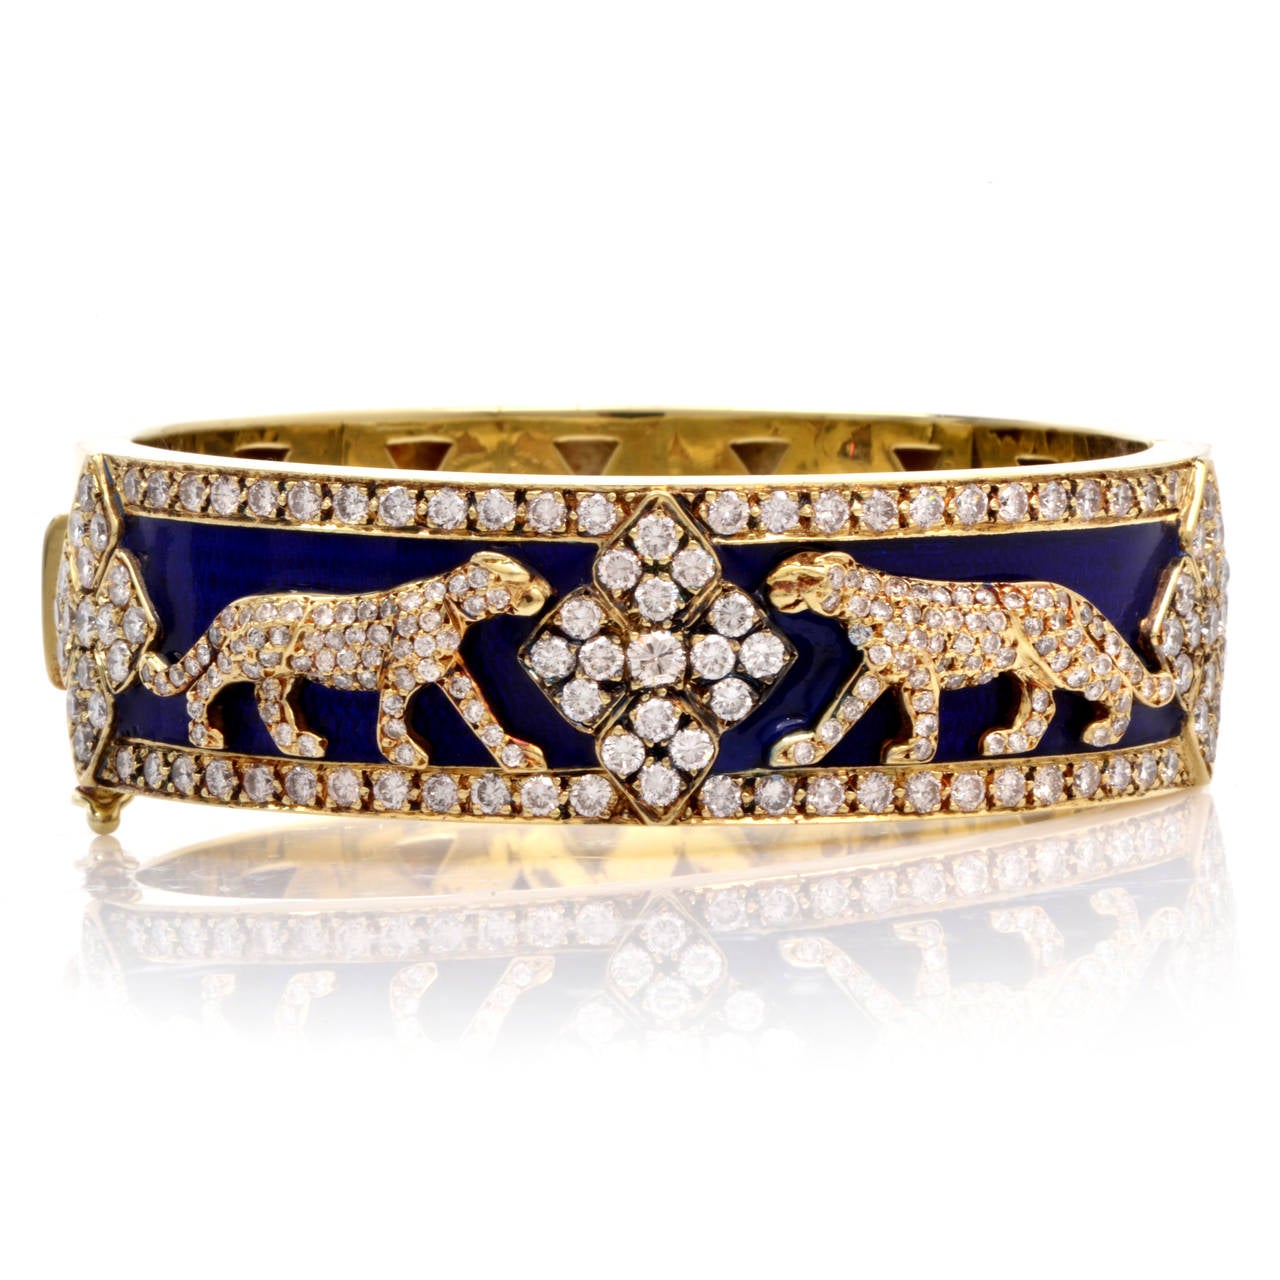 This Vintage 14K yellow gold bangle bracelet with a beautiful cobalt blue enameled hue showcases two detailed panther motif designs and is adorned with 225 genuine round cut dazzling diamonds weighing approx. 9.30 ct, graded H-I color, almost all VS